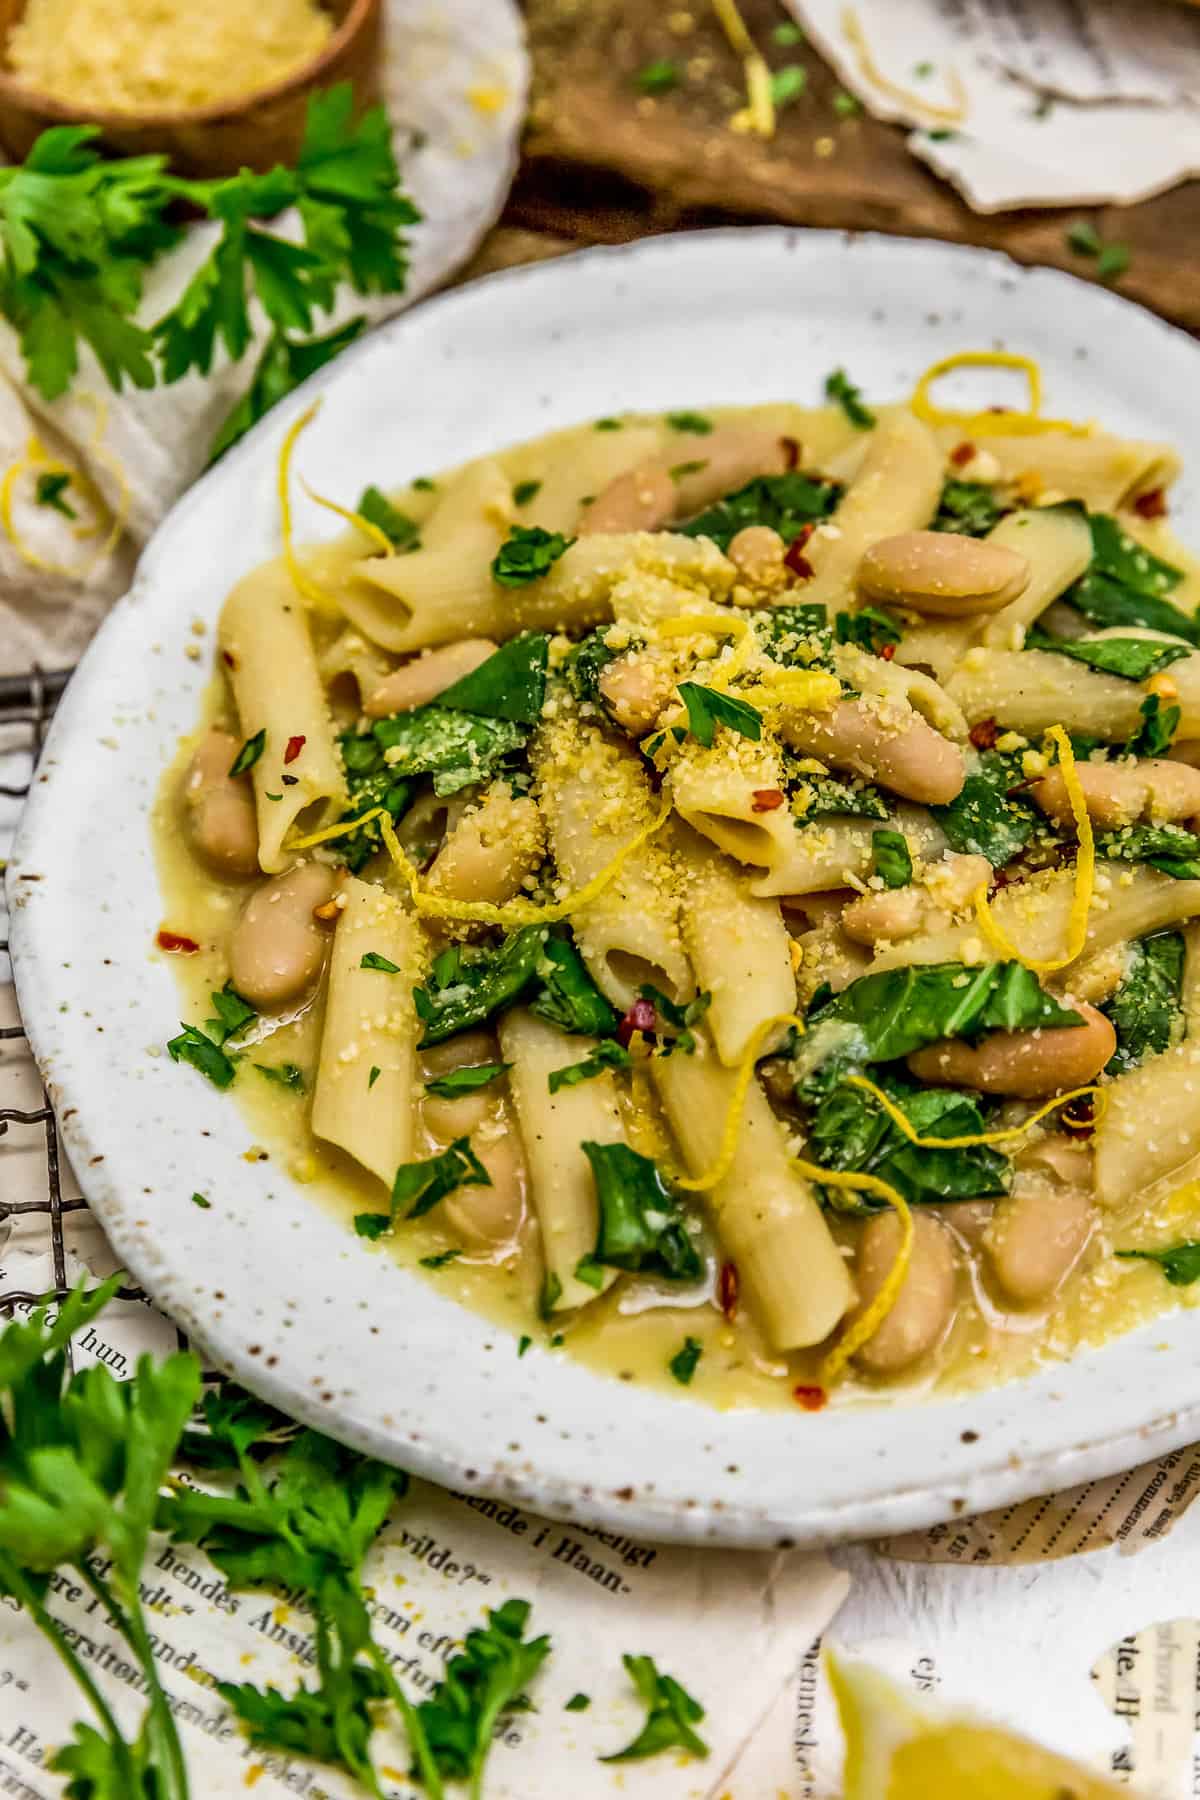 Plate of Lemony Pasta with Greens and Beans